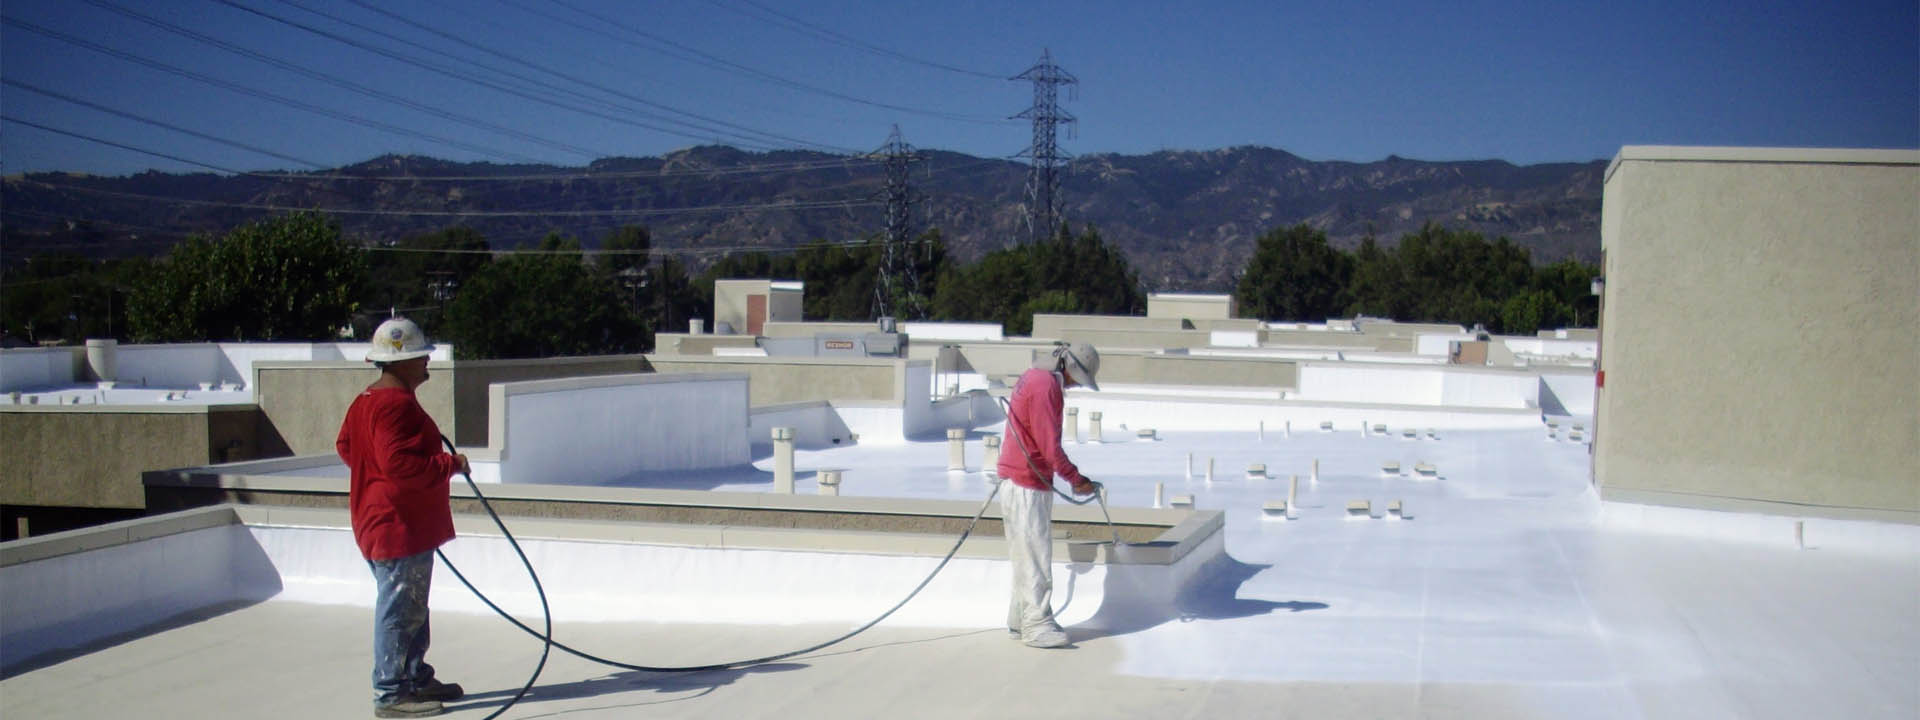 Commercial Roofing Systems - Roof Coatings